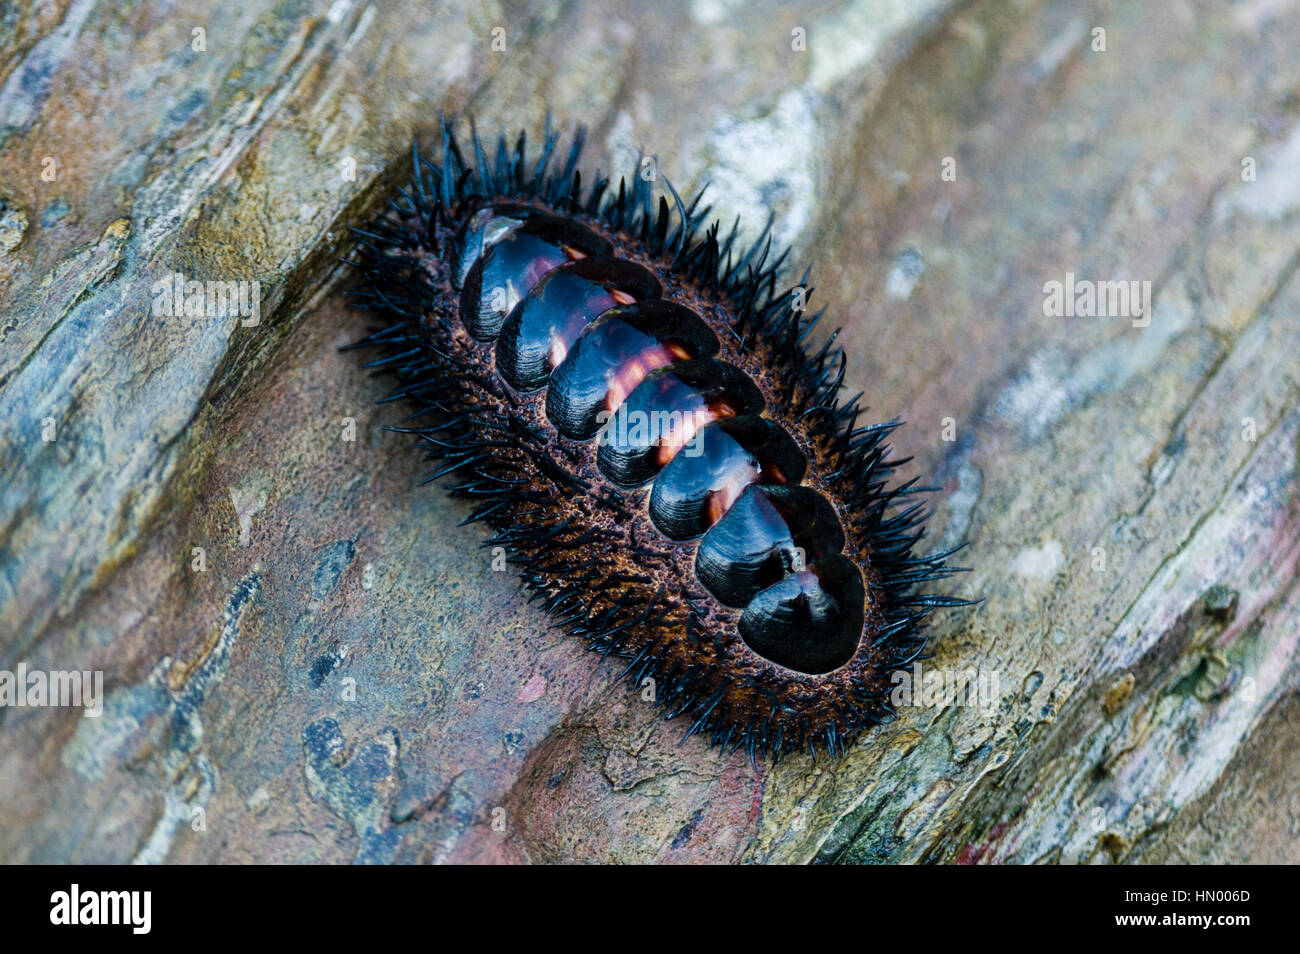 A Chiton, Acanthopleura spinosa, clinging to a rock at low tide. Stock Photo